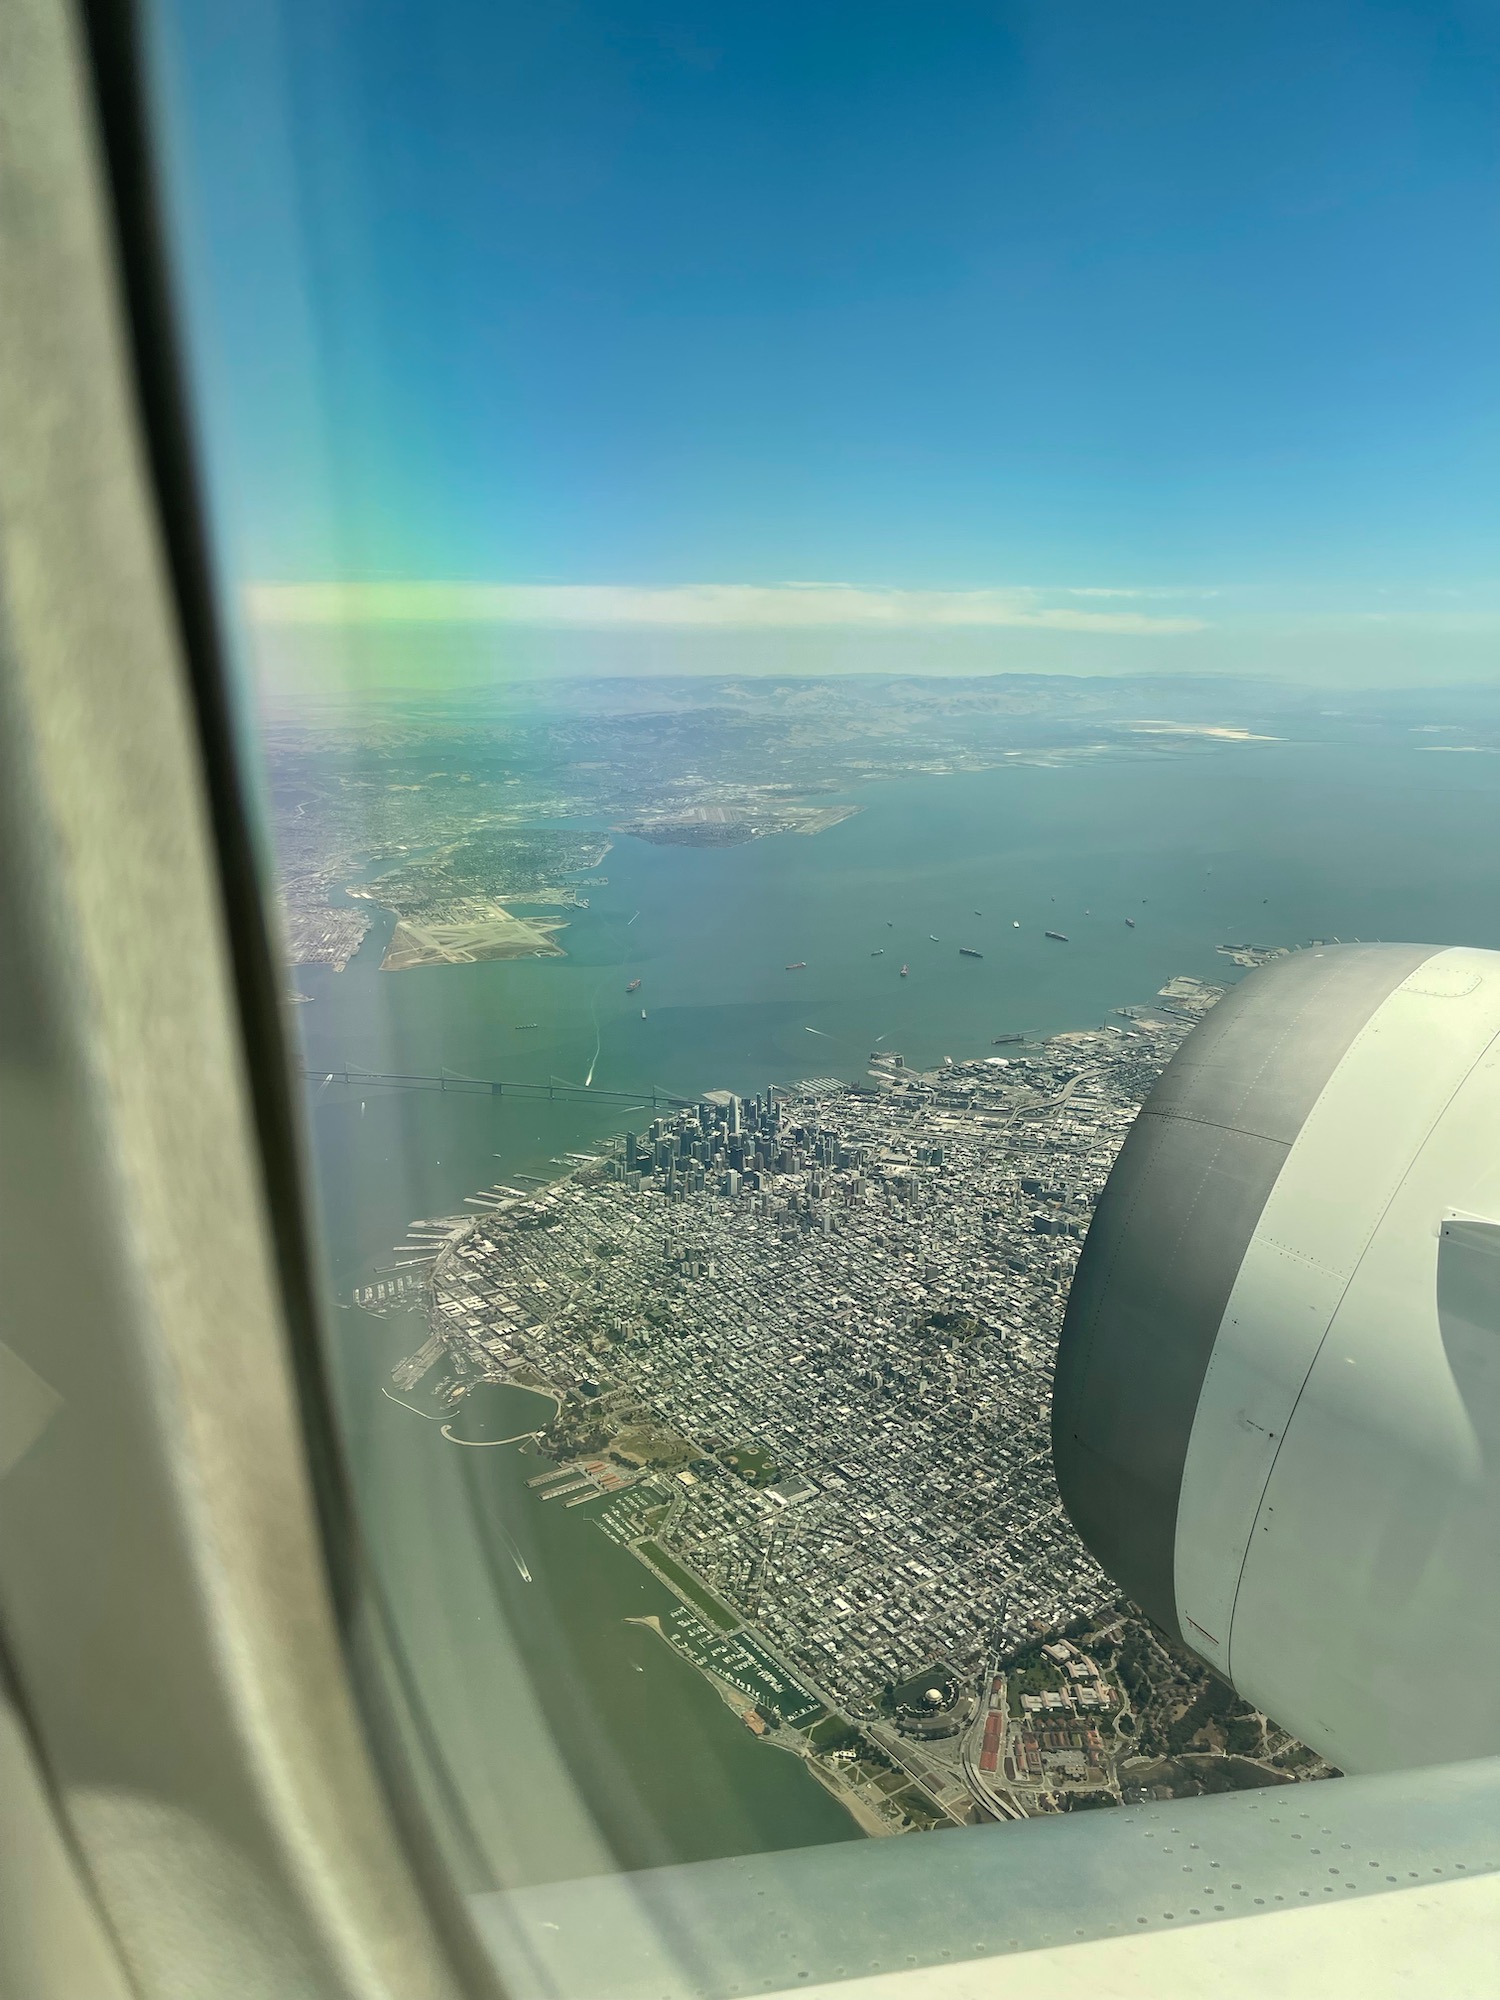 an airplane wing and a city seen from the window of an airplane